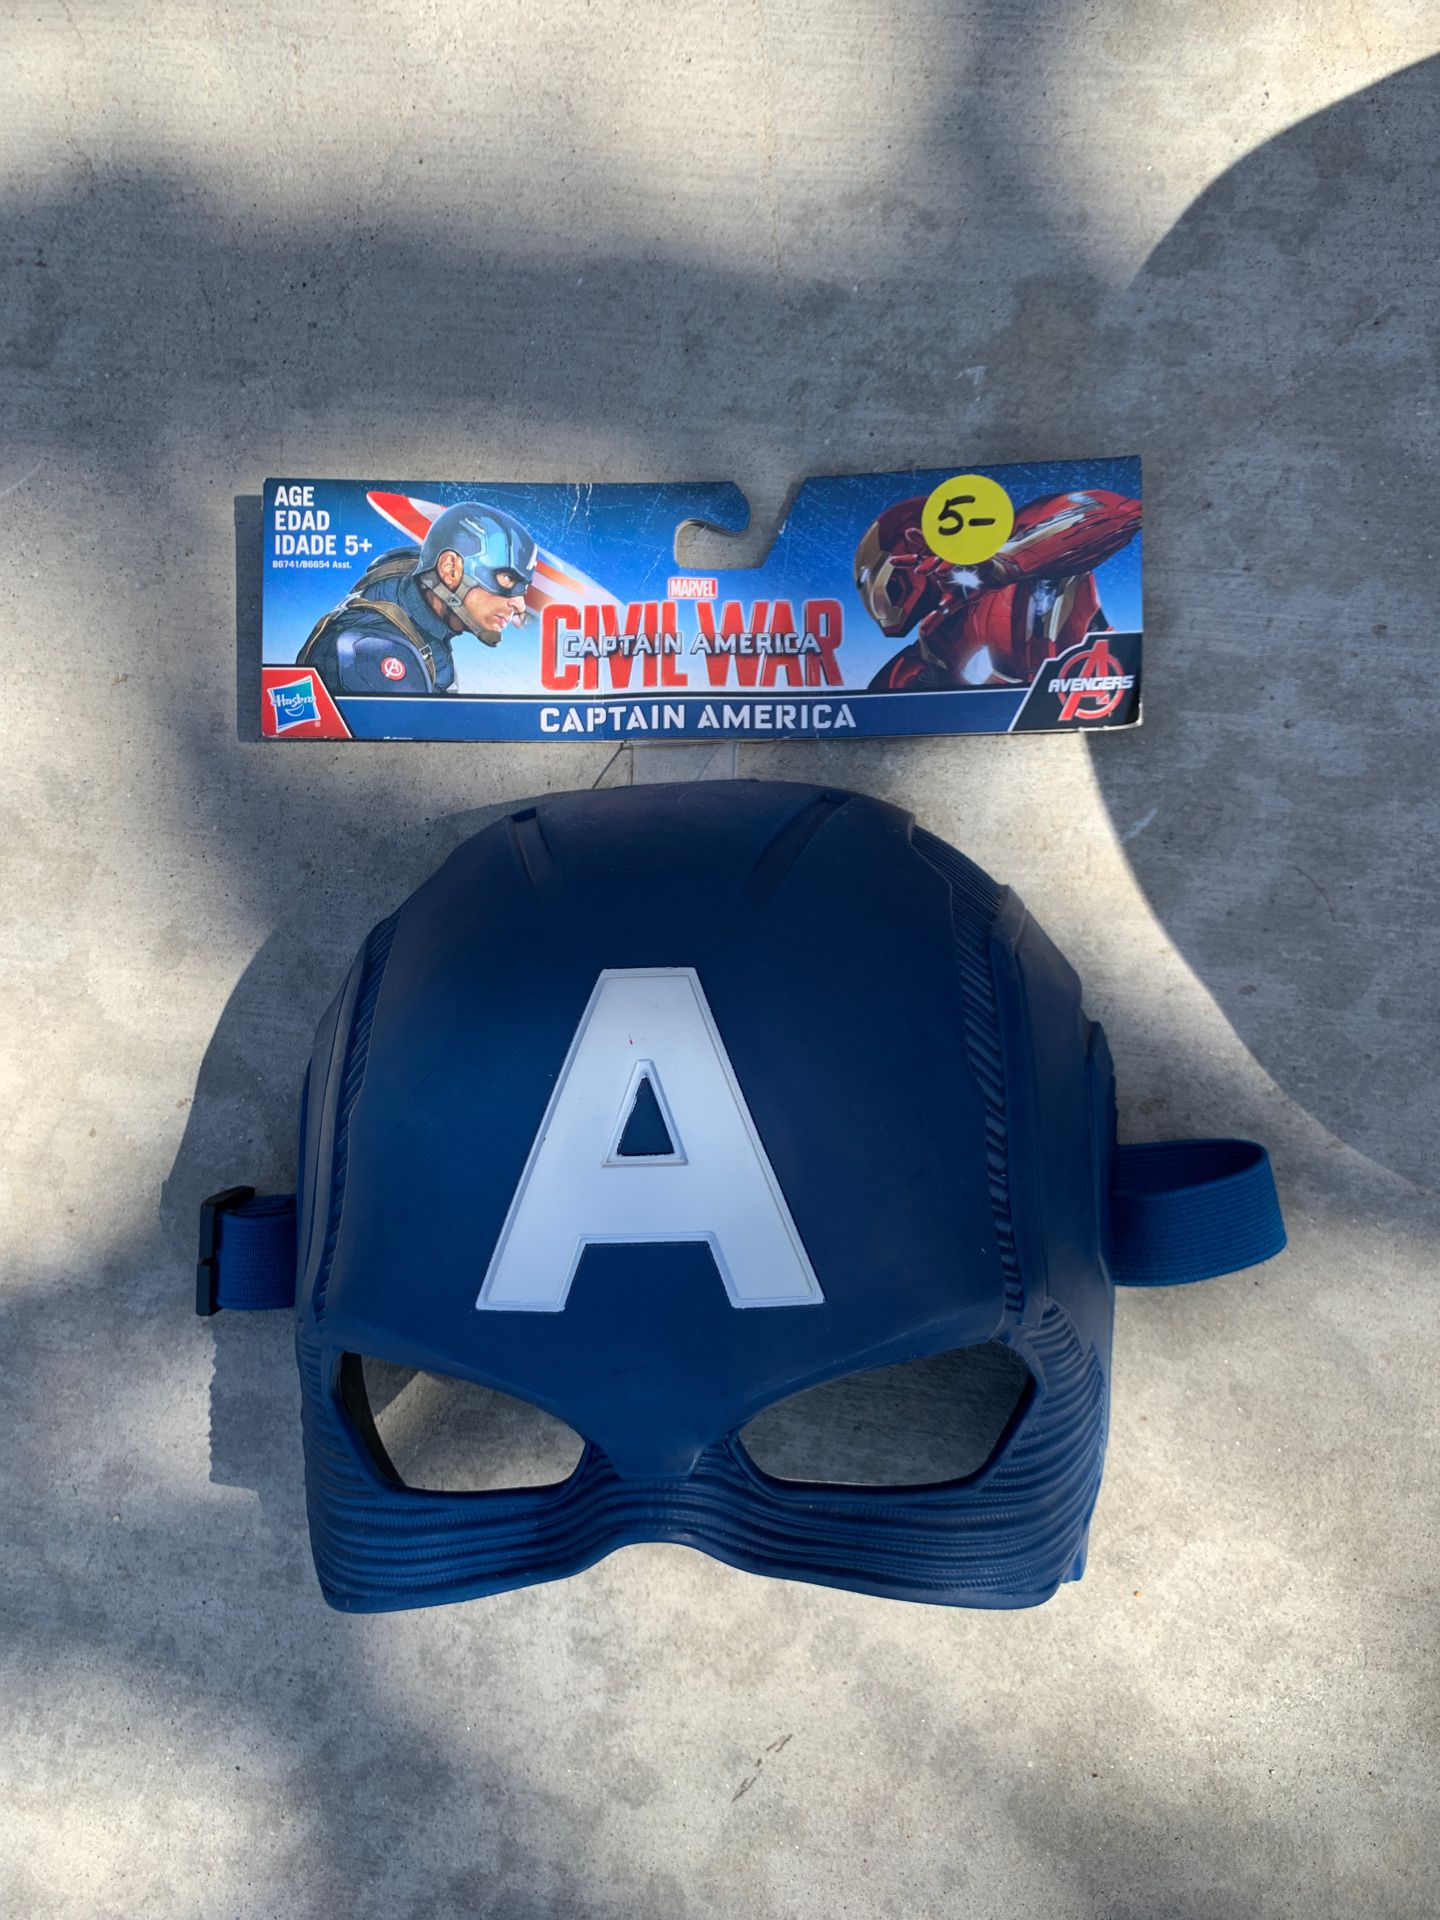 Captain America face mask (4 total)